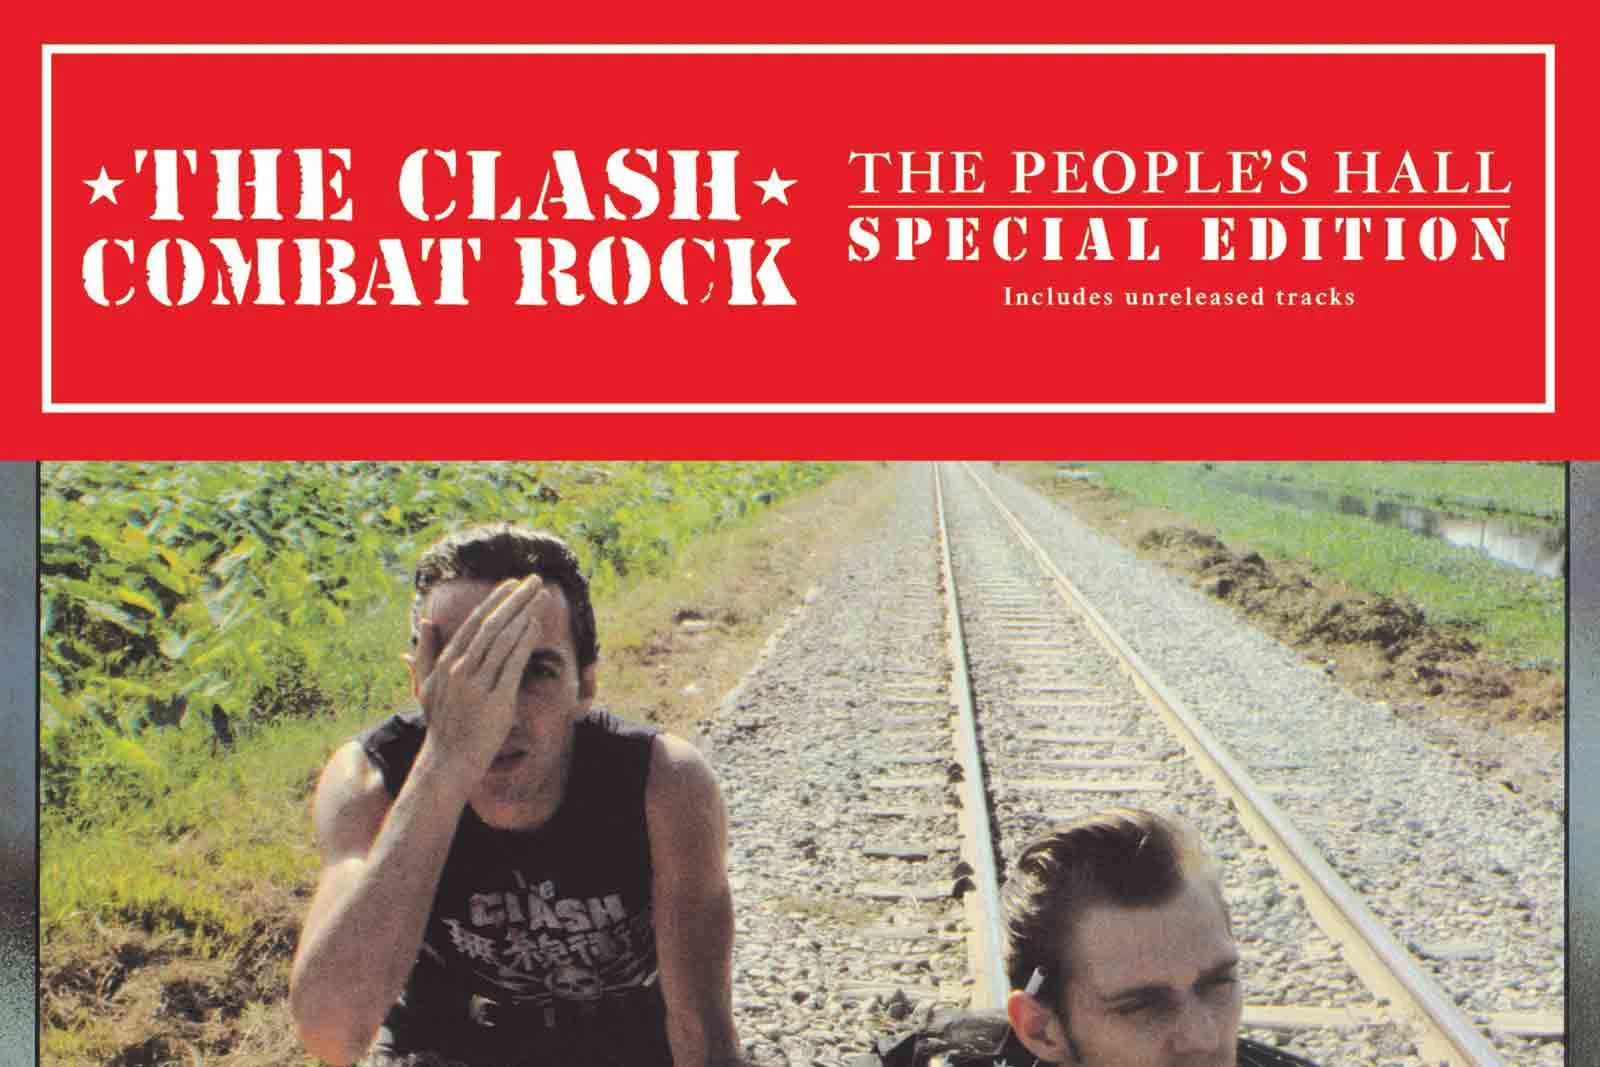 Clash to Release 40th Anniversary Edition of 'Combat Rock'